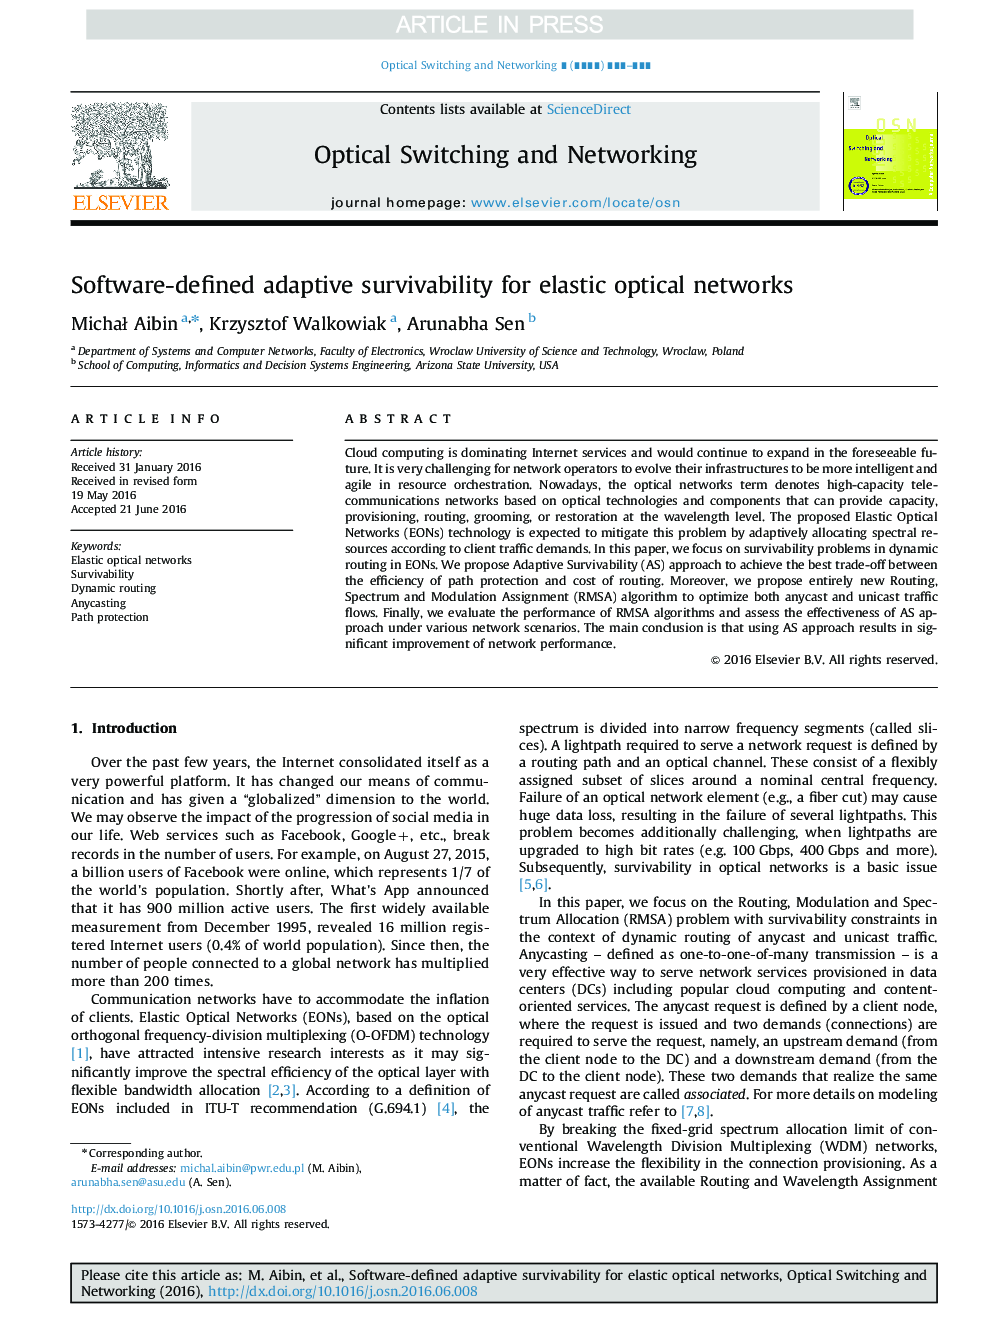 Software-defined adaptive survivability for elastic optical networks